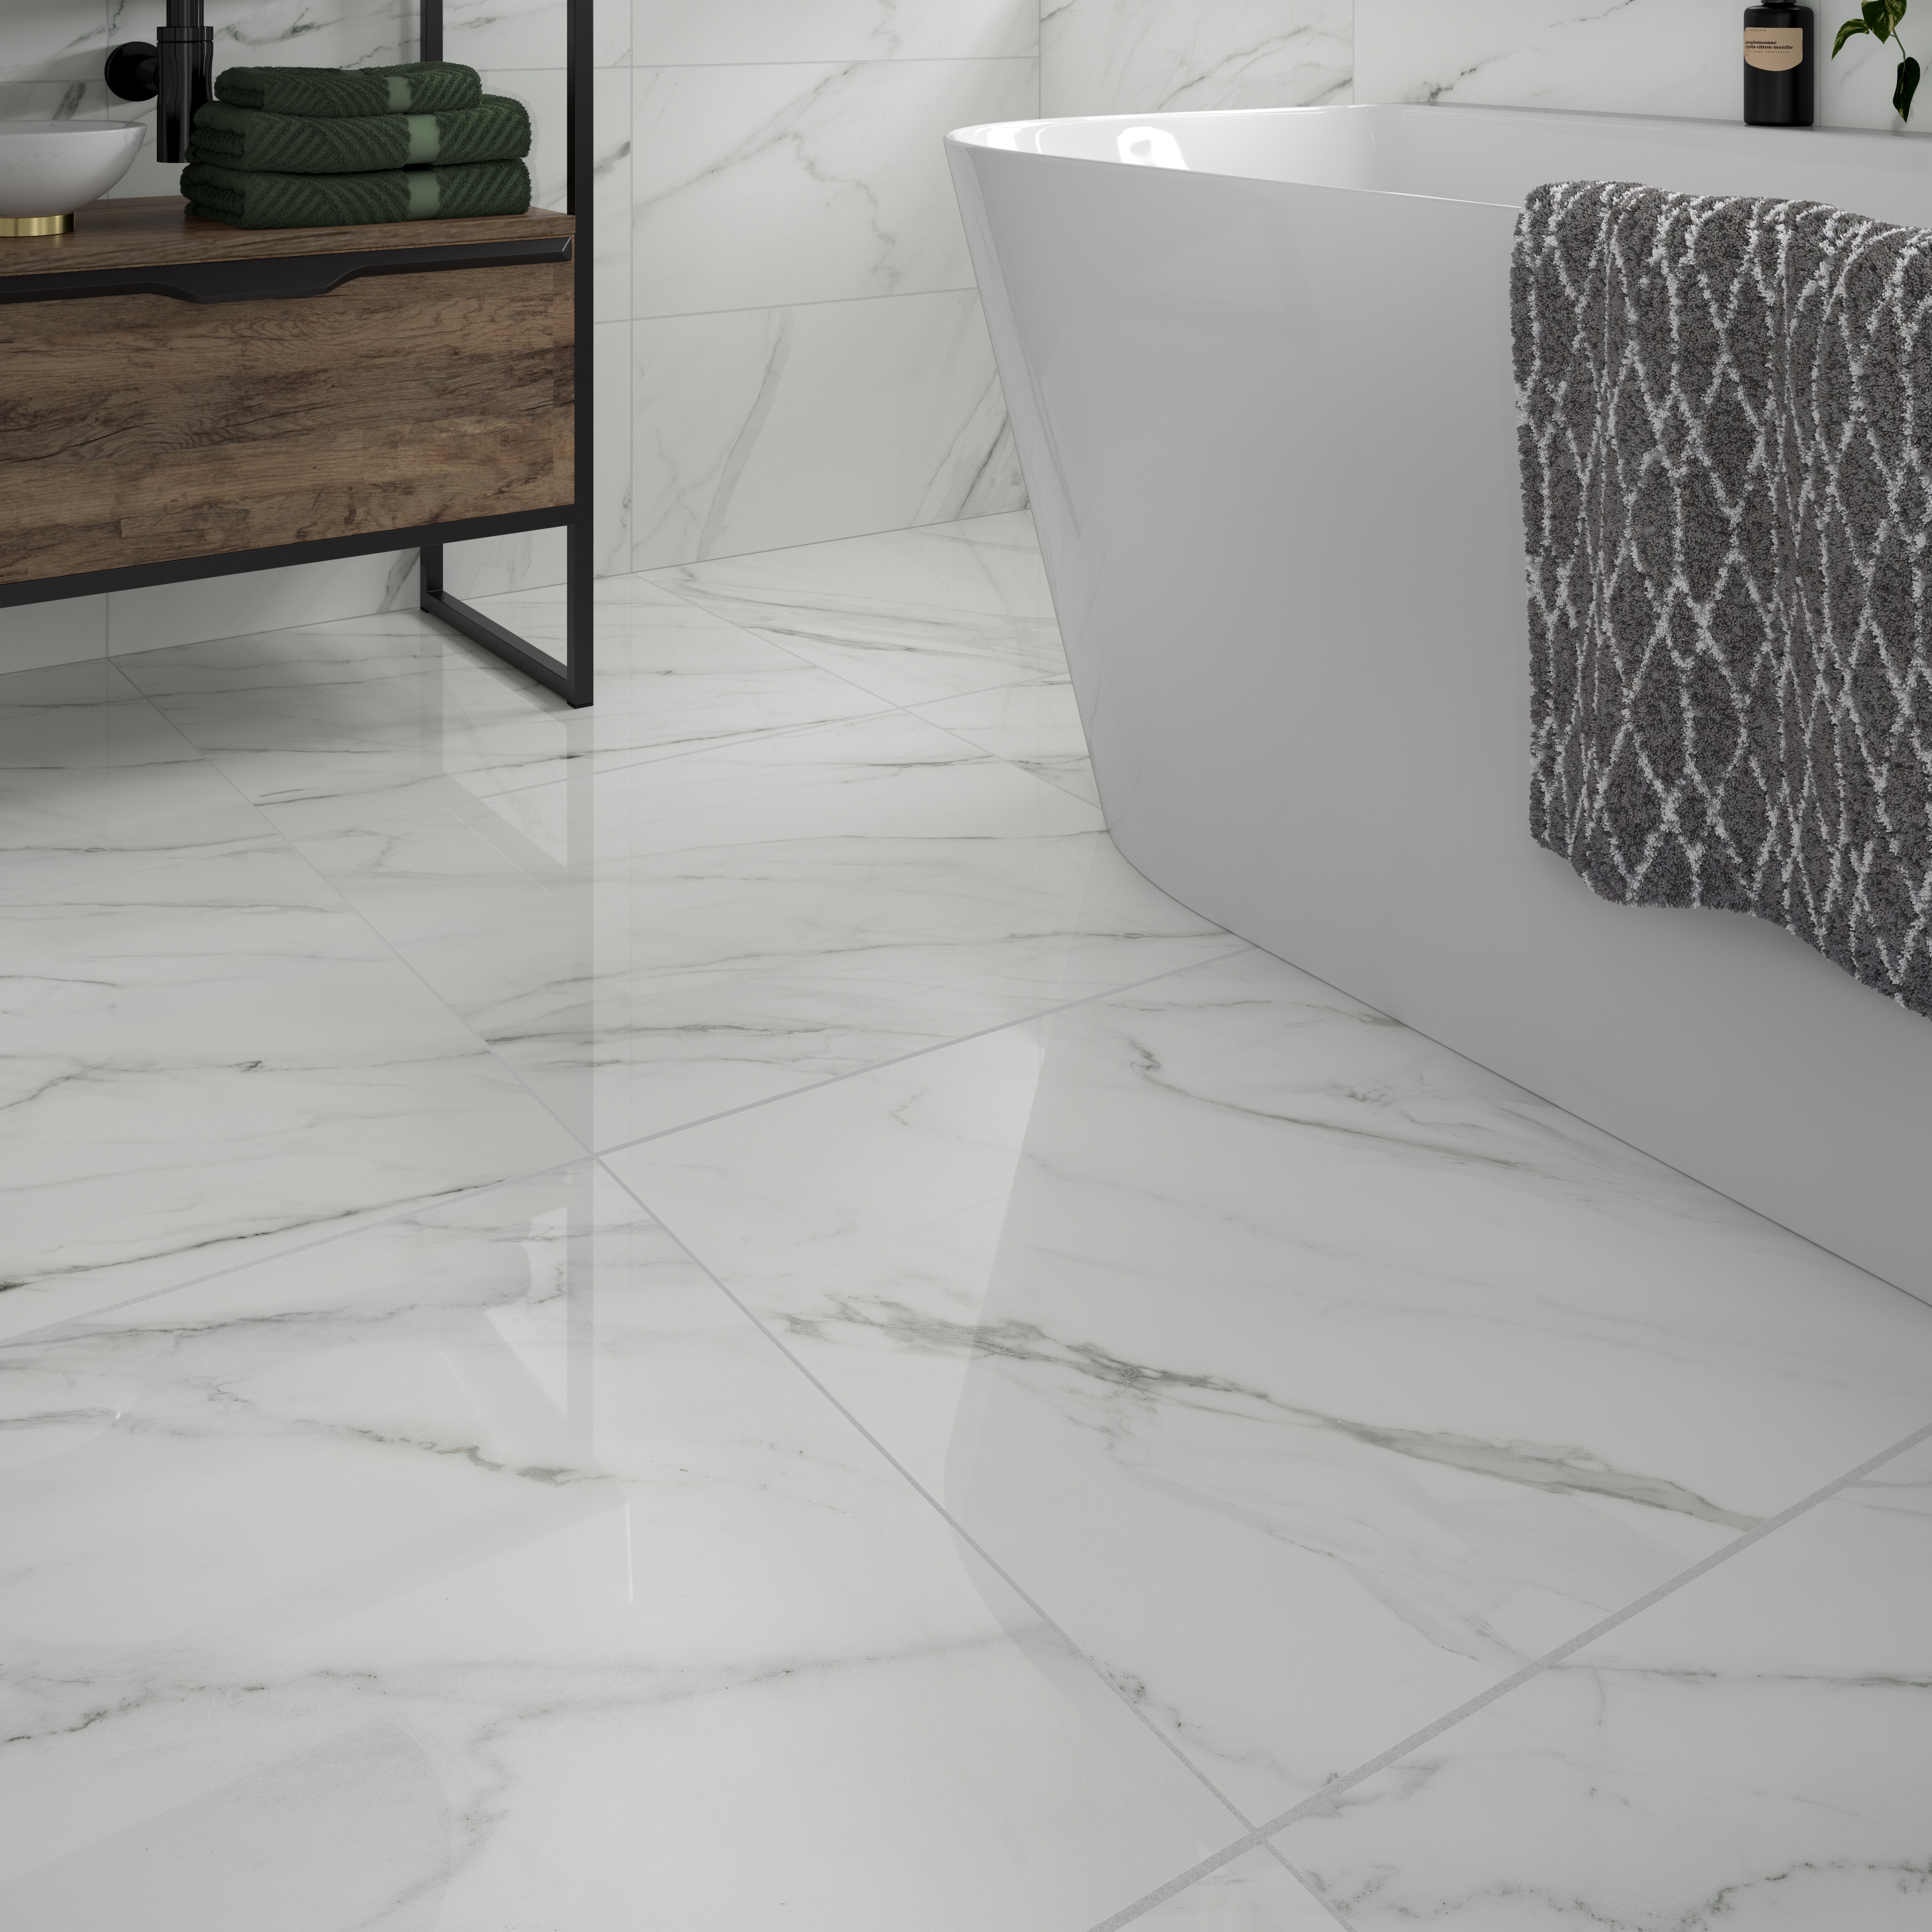 Image of Wickes Calacatta Charm Polished Porcelain Wall & Floor Tile - 600 x 600mm